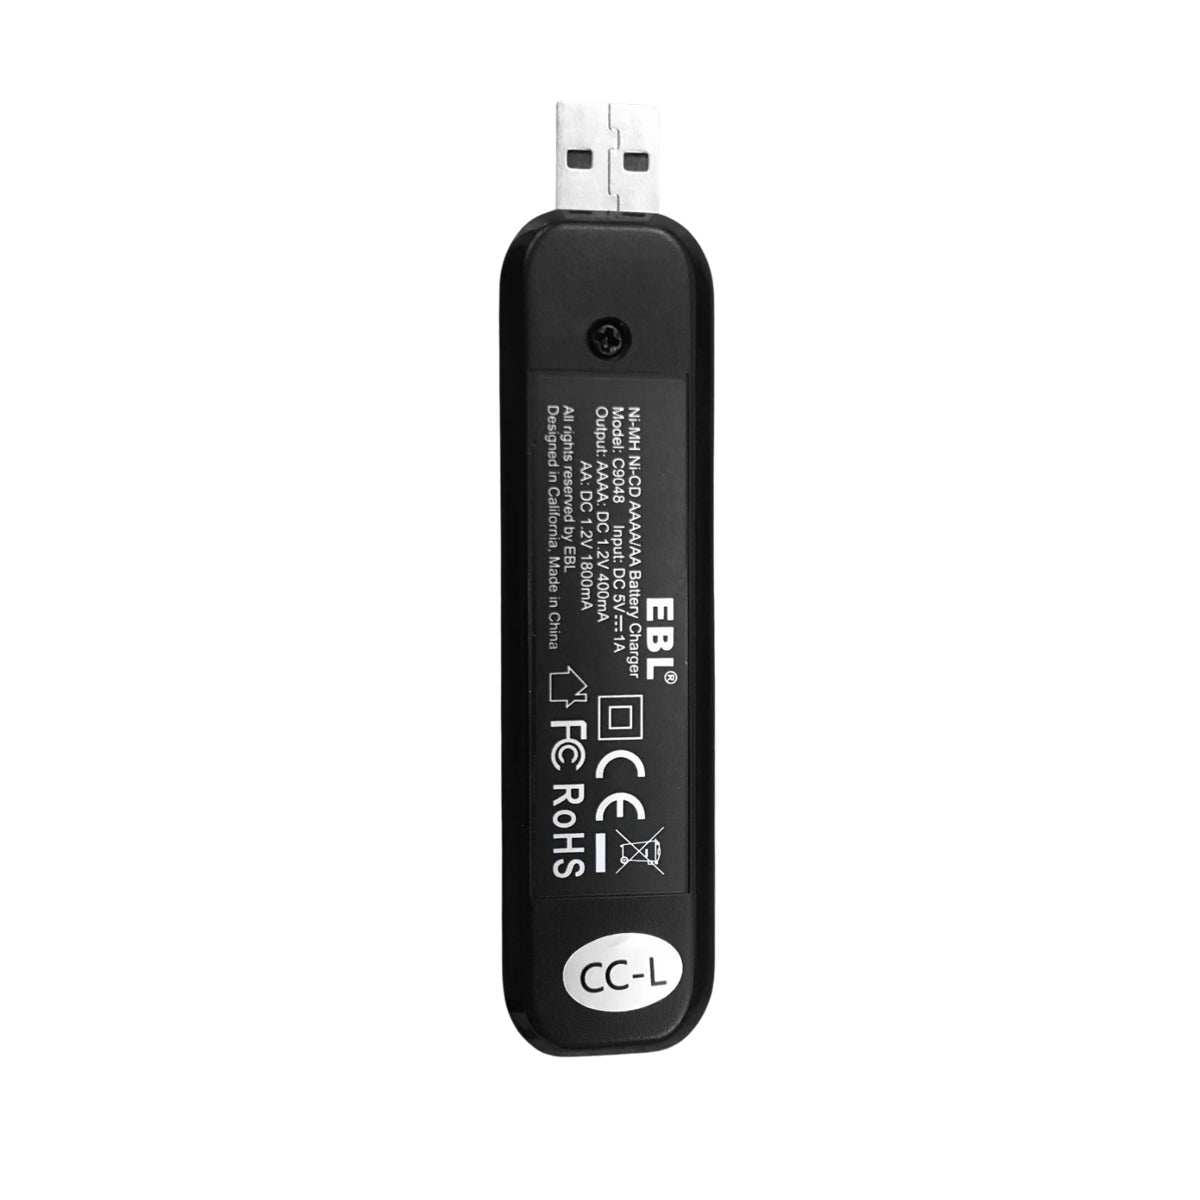 EBL CDMYC0006A Smart LED AA / AAAA Battery Charger with 5V USB Type-A Plug, and Built In Over Current Protection for Li-Ion and NiMH Batteries